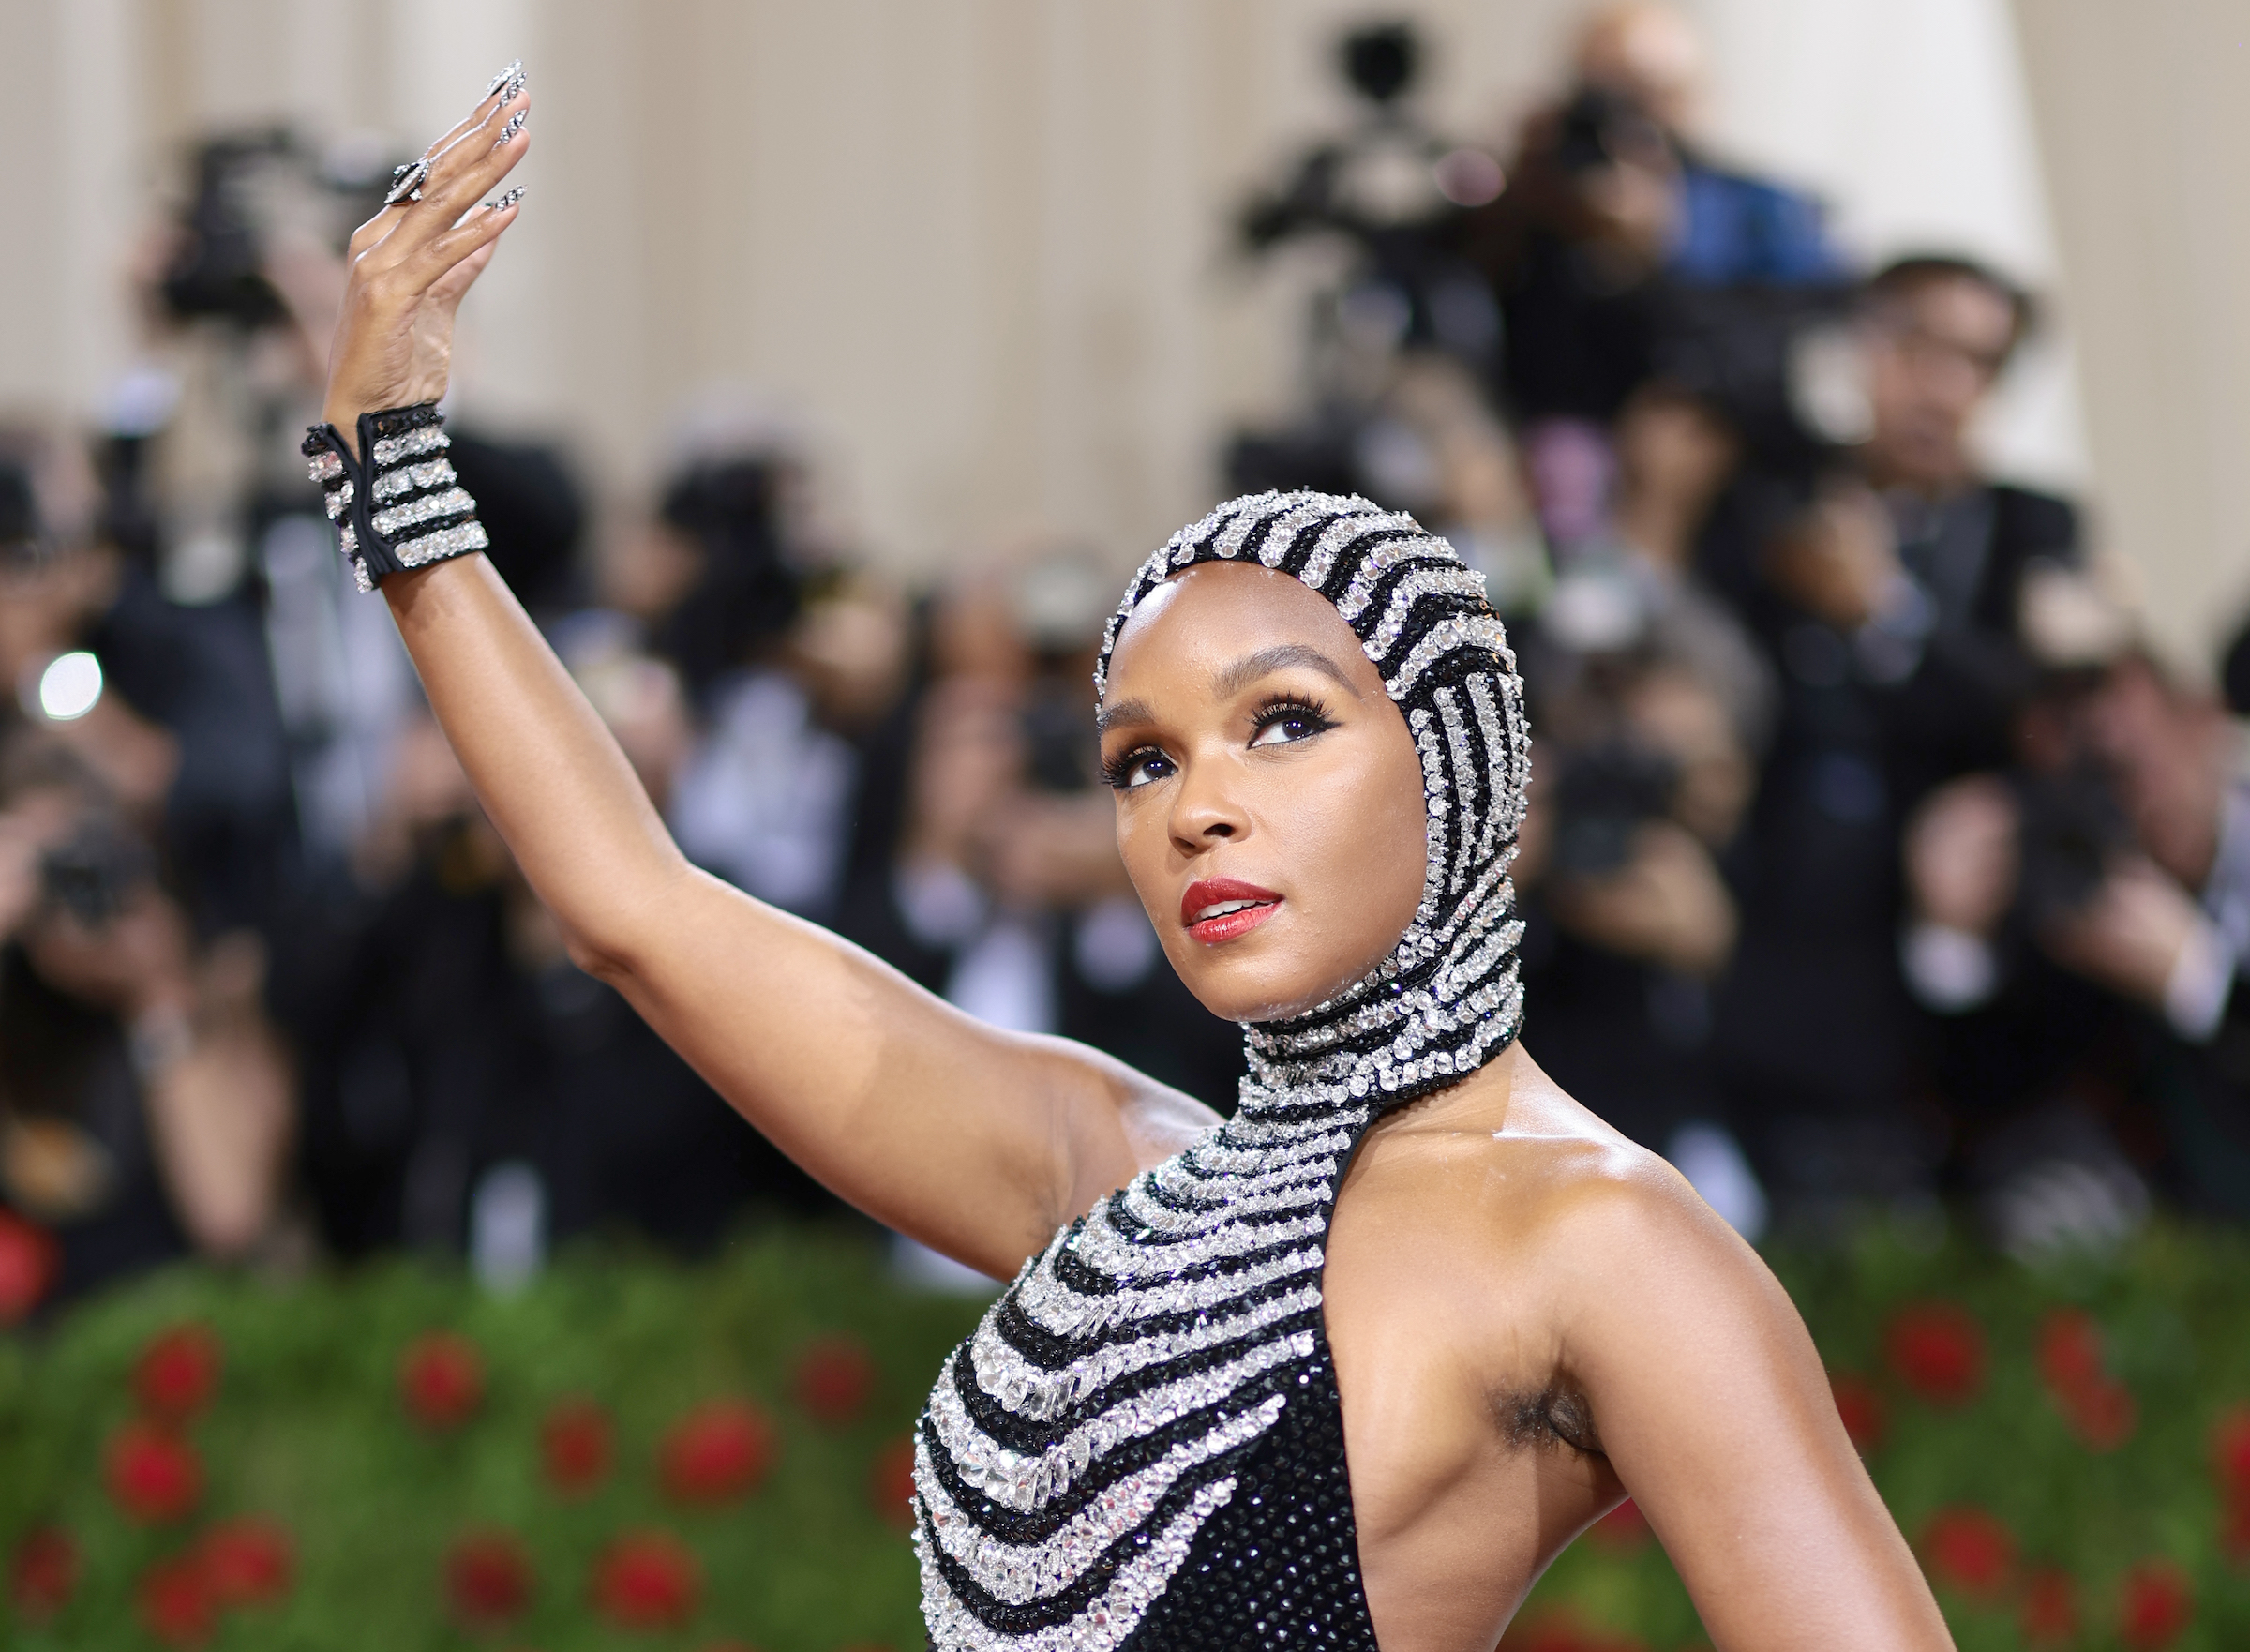 Janelle Monáe wearing black and white at the Met Gala